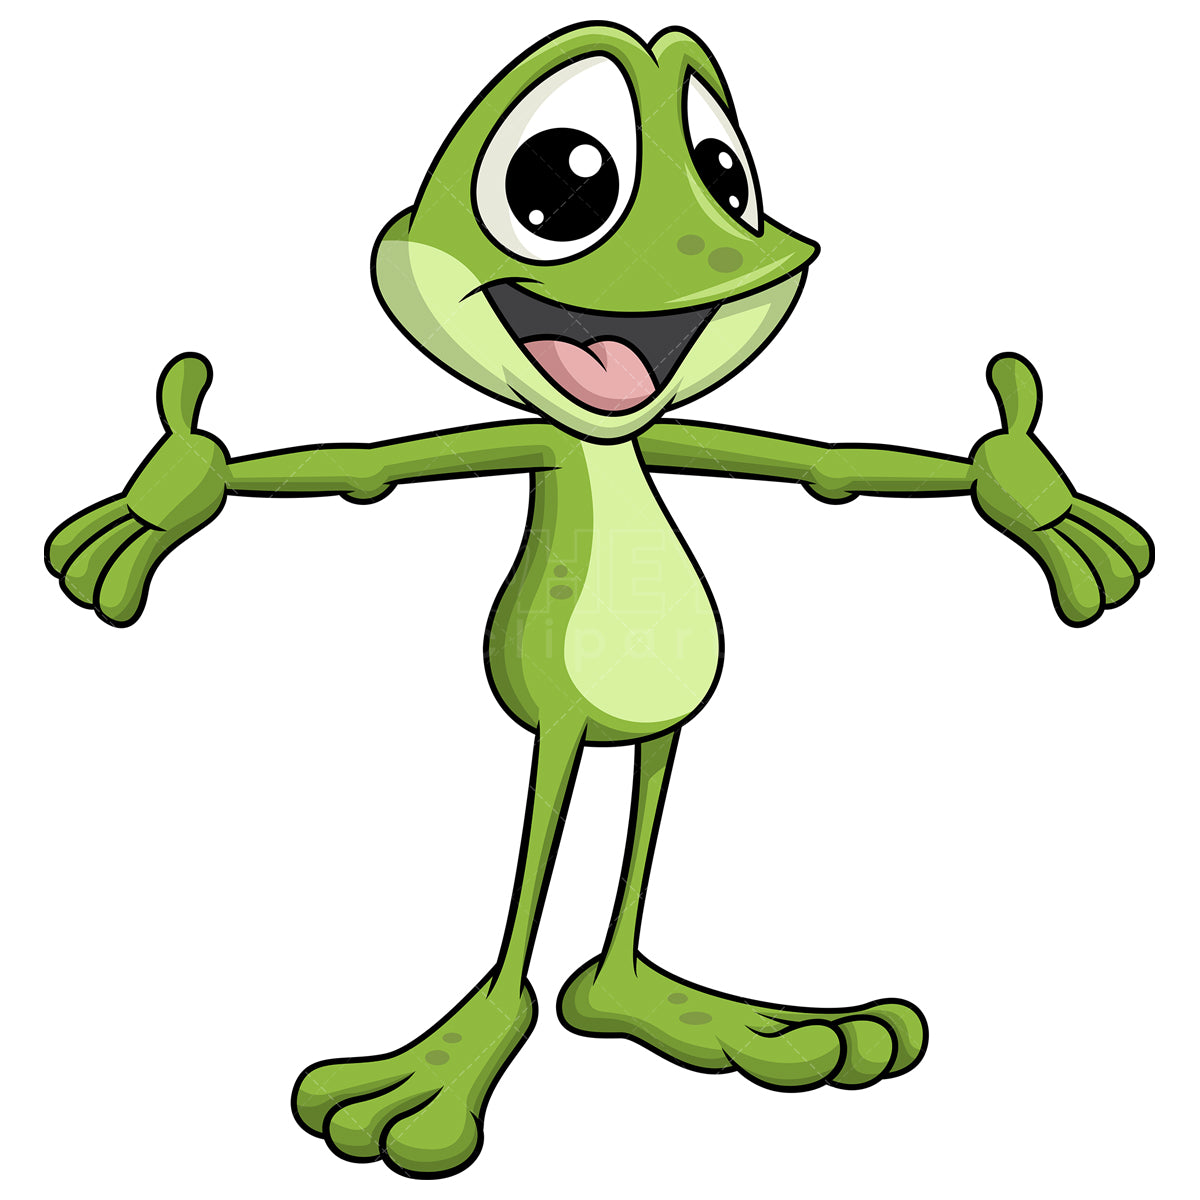 Royalty-free stock vector illustration of  a happy frog mascot.